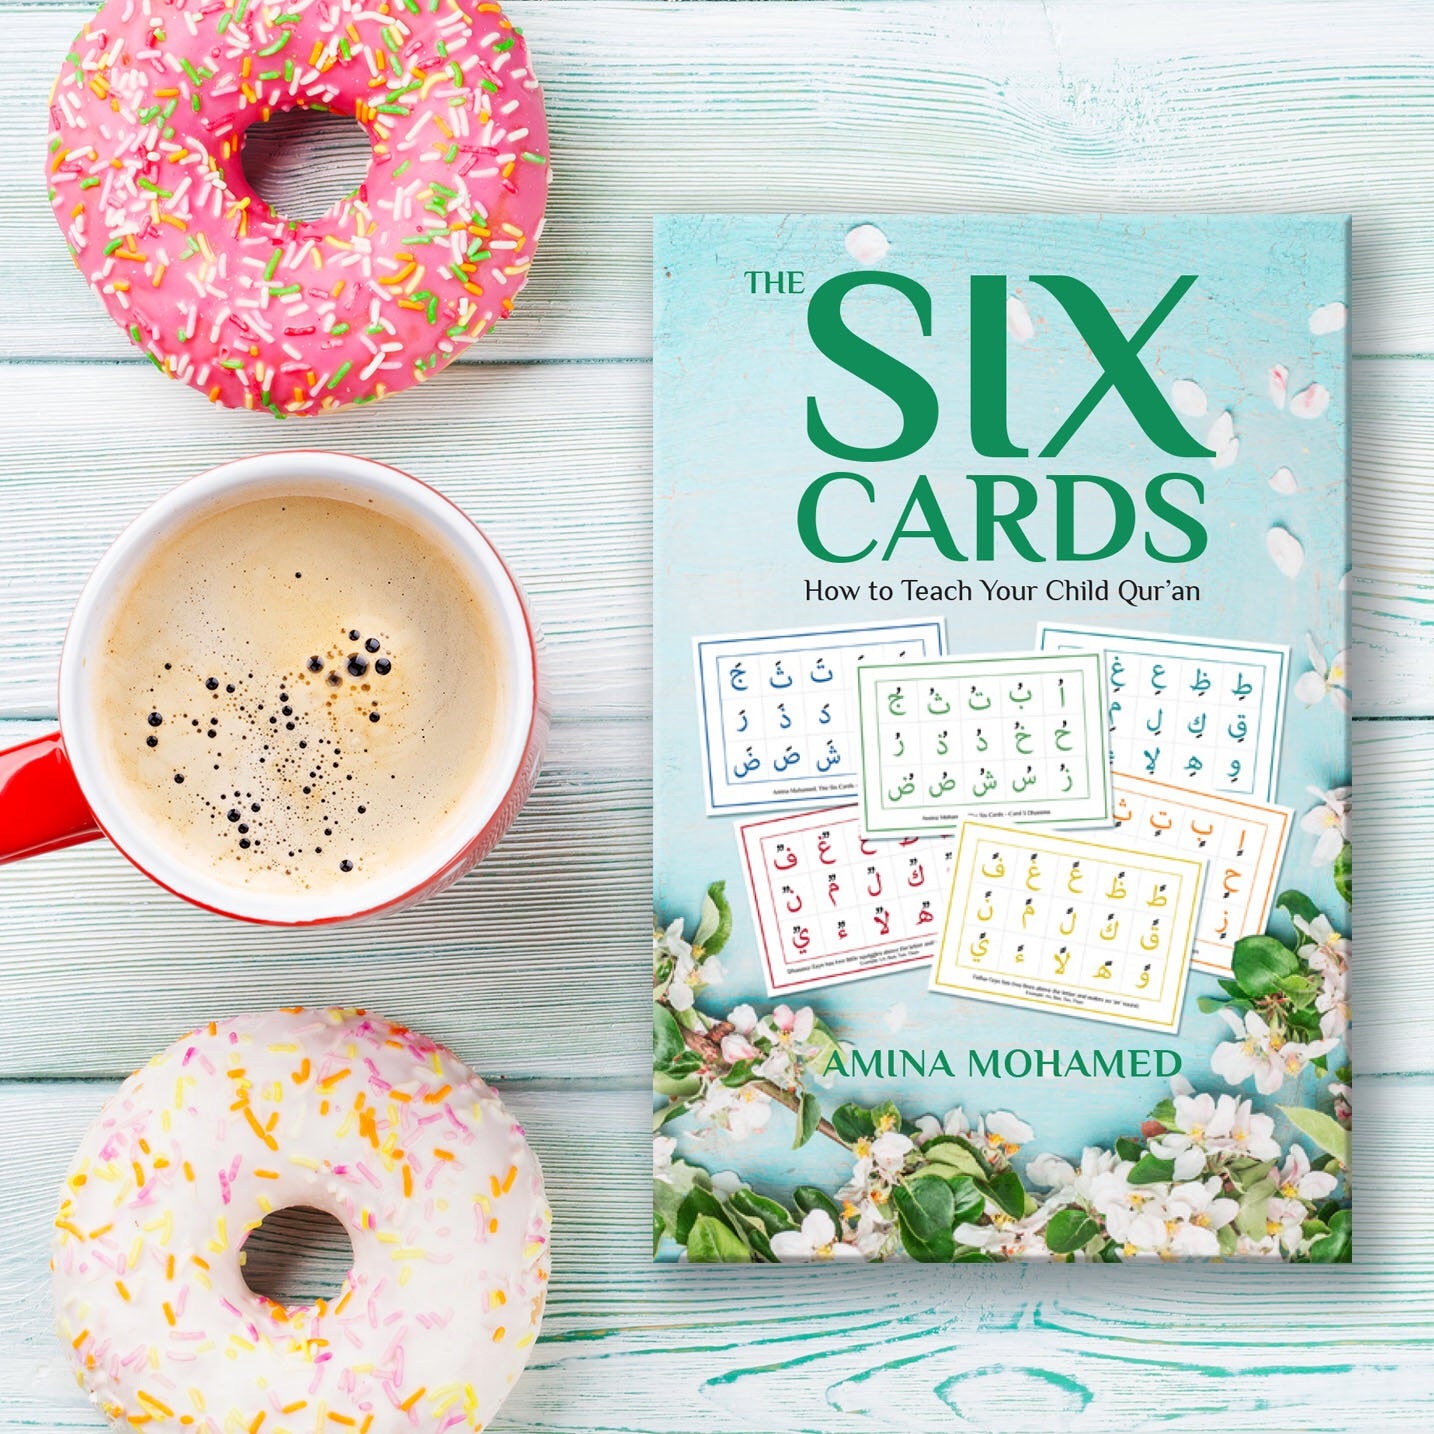 The Six Cards: How To Teach Your Child Qur'an (Book + Cards)